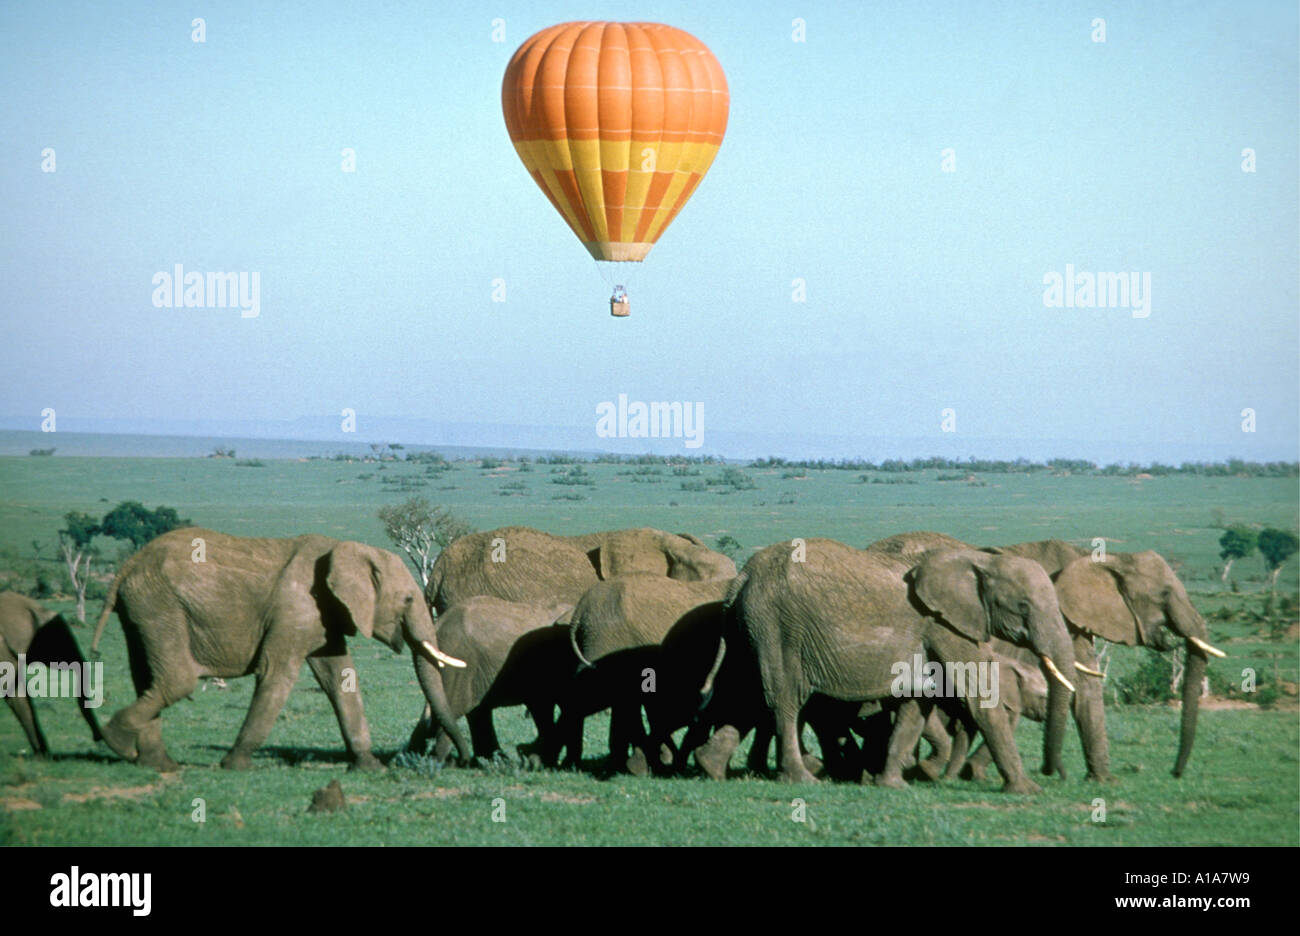 Hot Air Balloon flying over a herd of elephants in the Masai Mara National Reserve Kenya East Africa Stock Photo